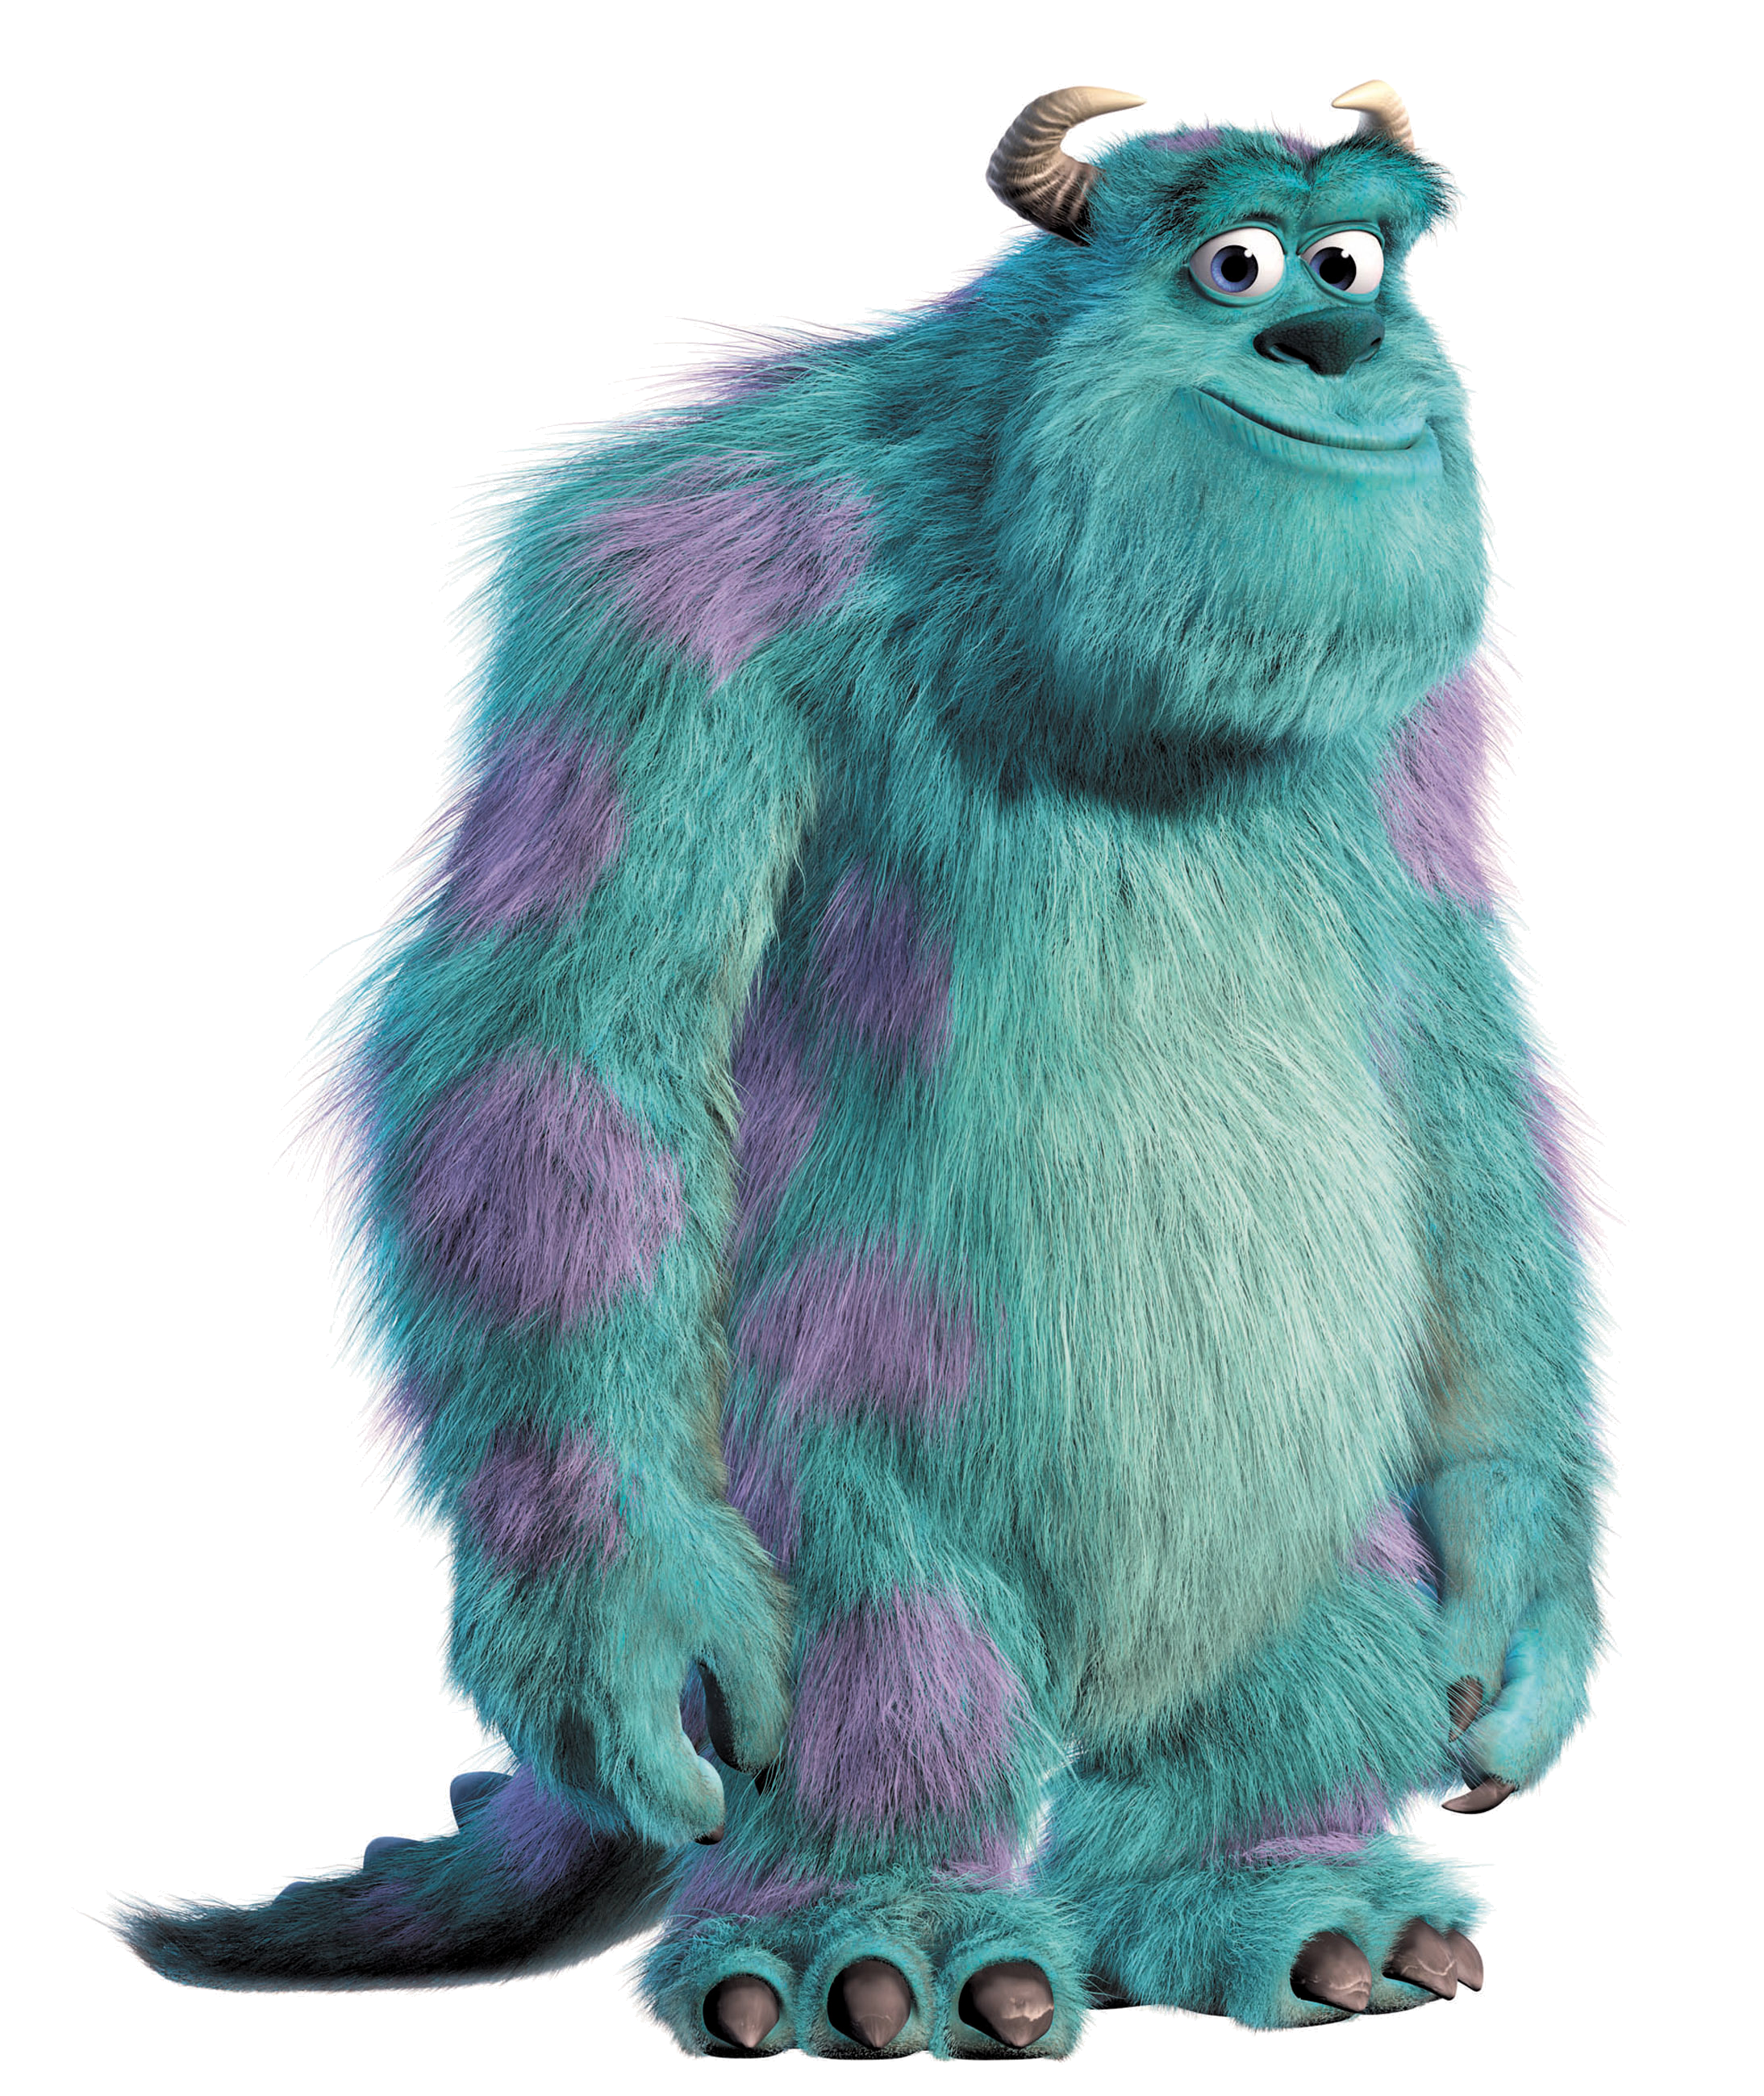 Sulley Monsters INC Imagui